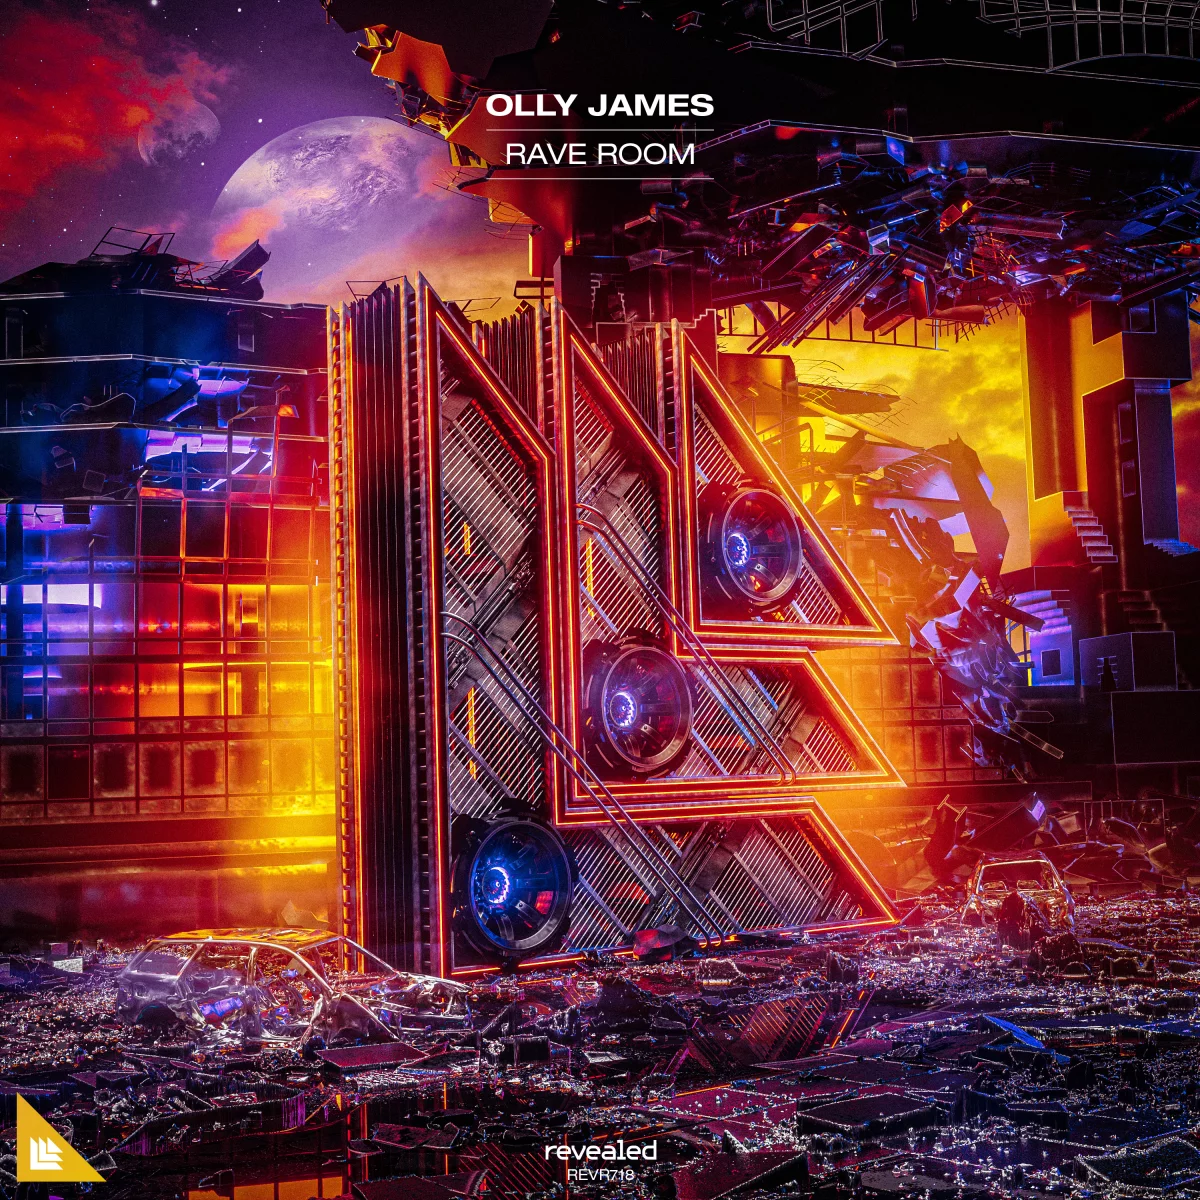 Rave Room - Olly James⁠ 